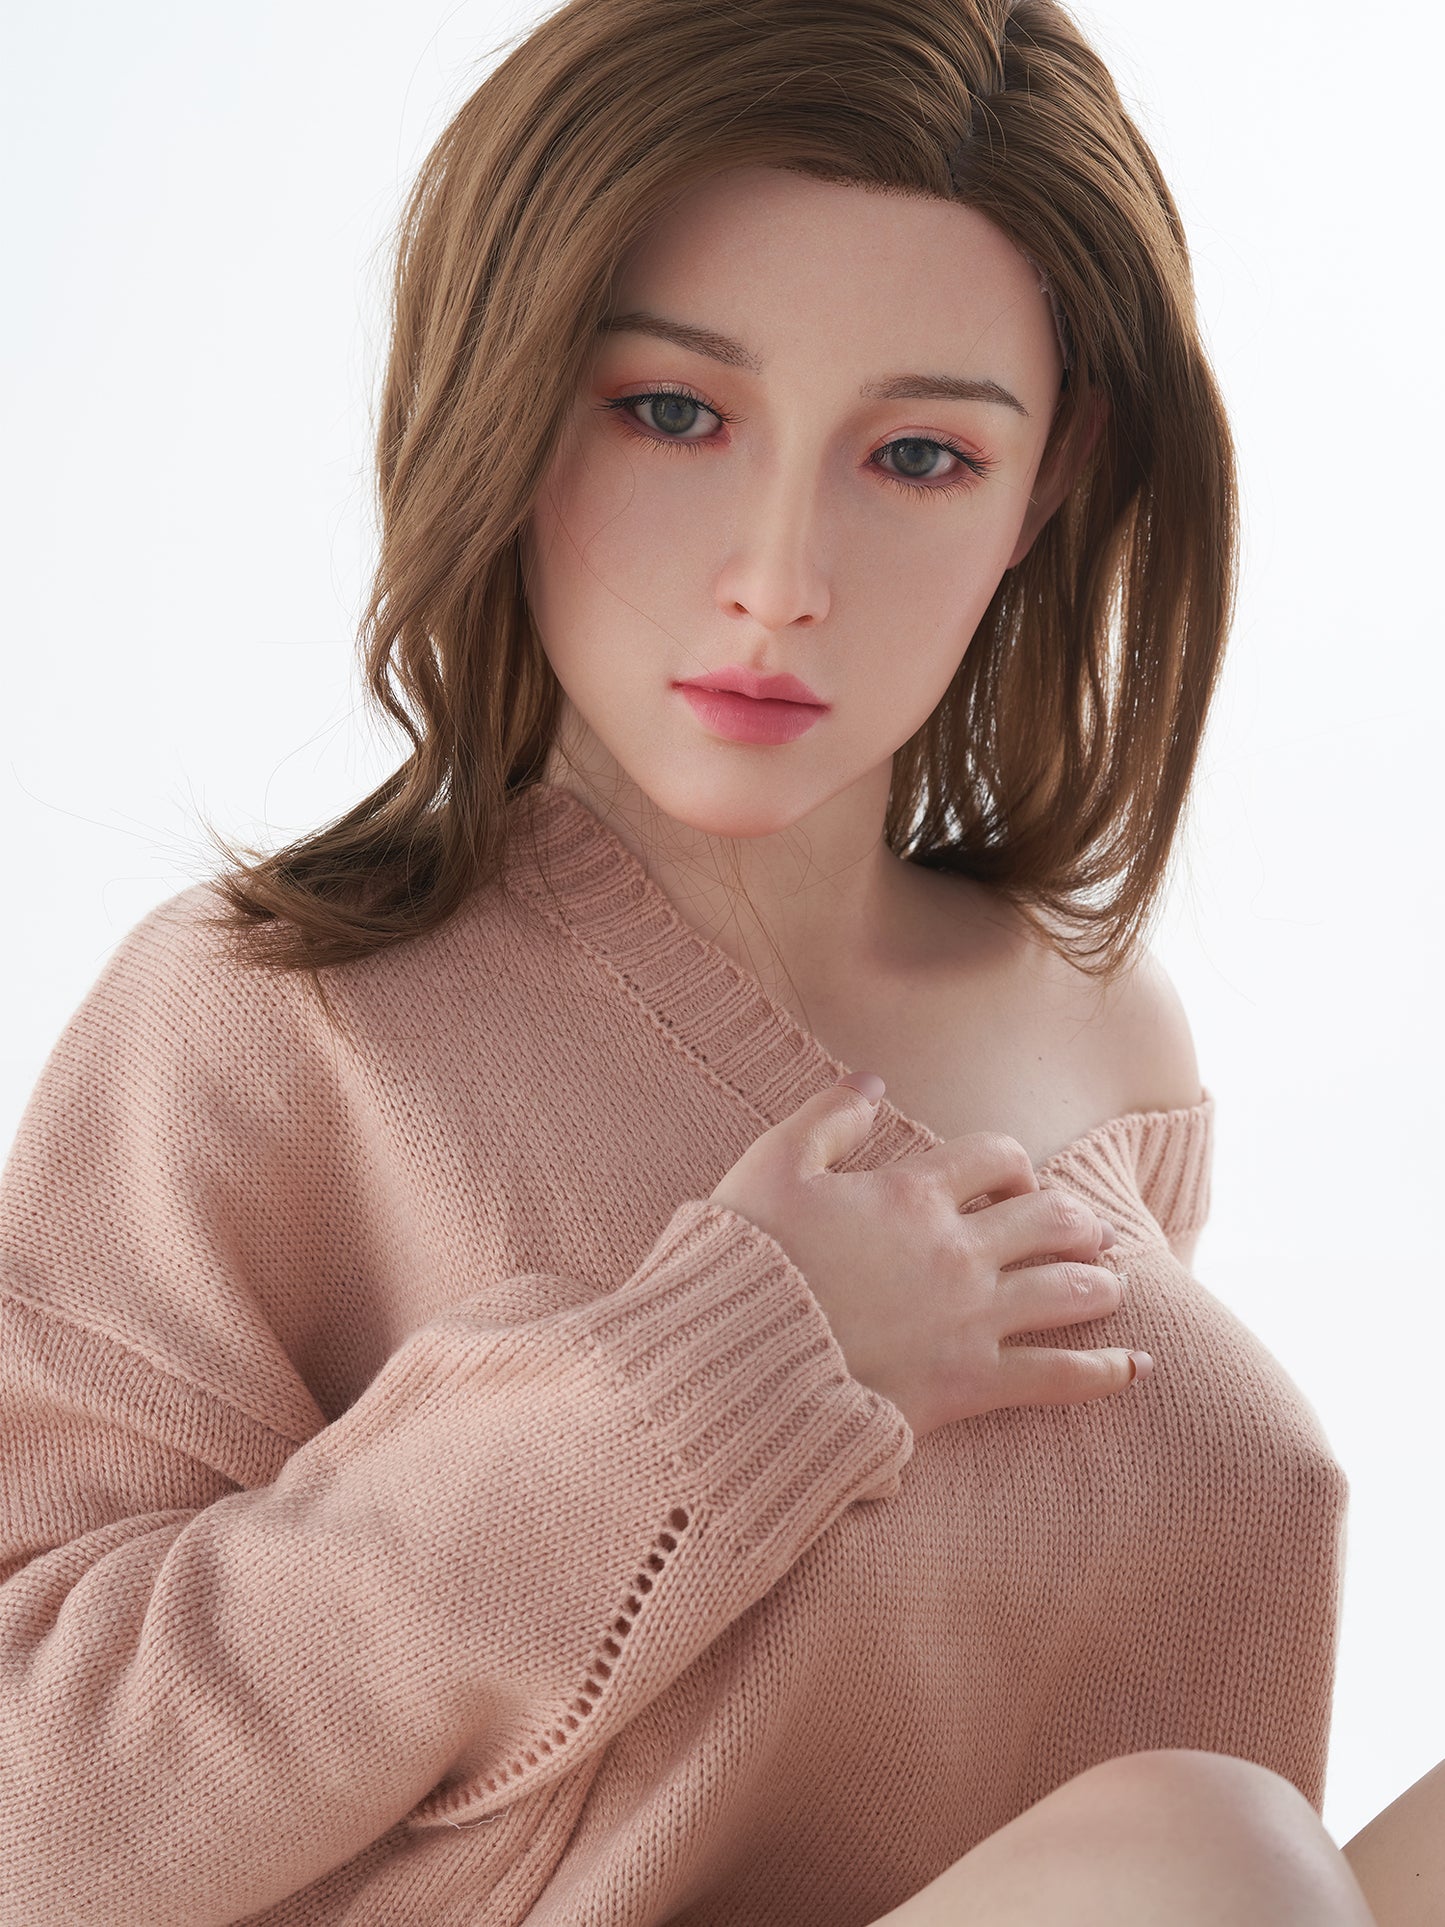 ZELEX Silicone Sex Doll Realistic Inspiration Series - Rosa 165 cm